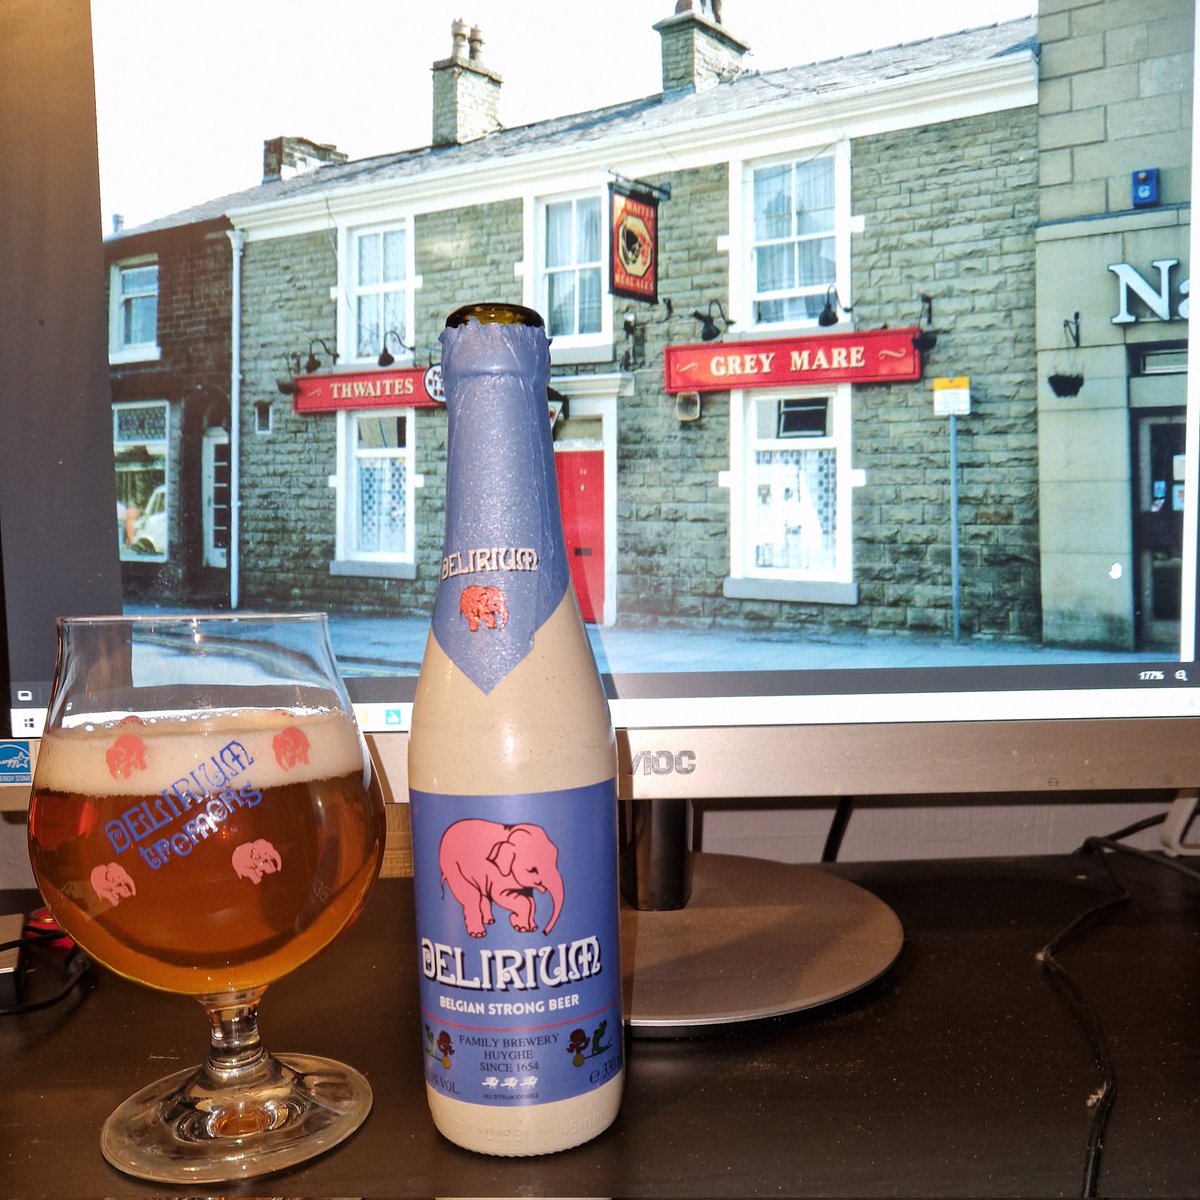 Huyghe, Delirium Tremens... and the Grey Mare in Ramsbottom.